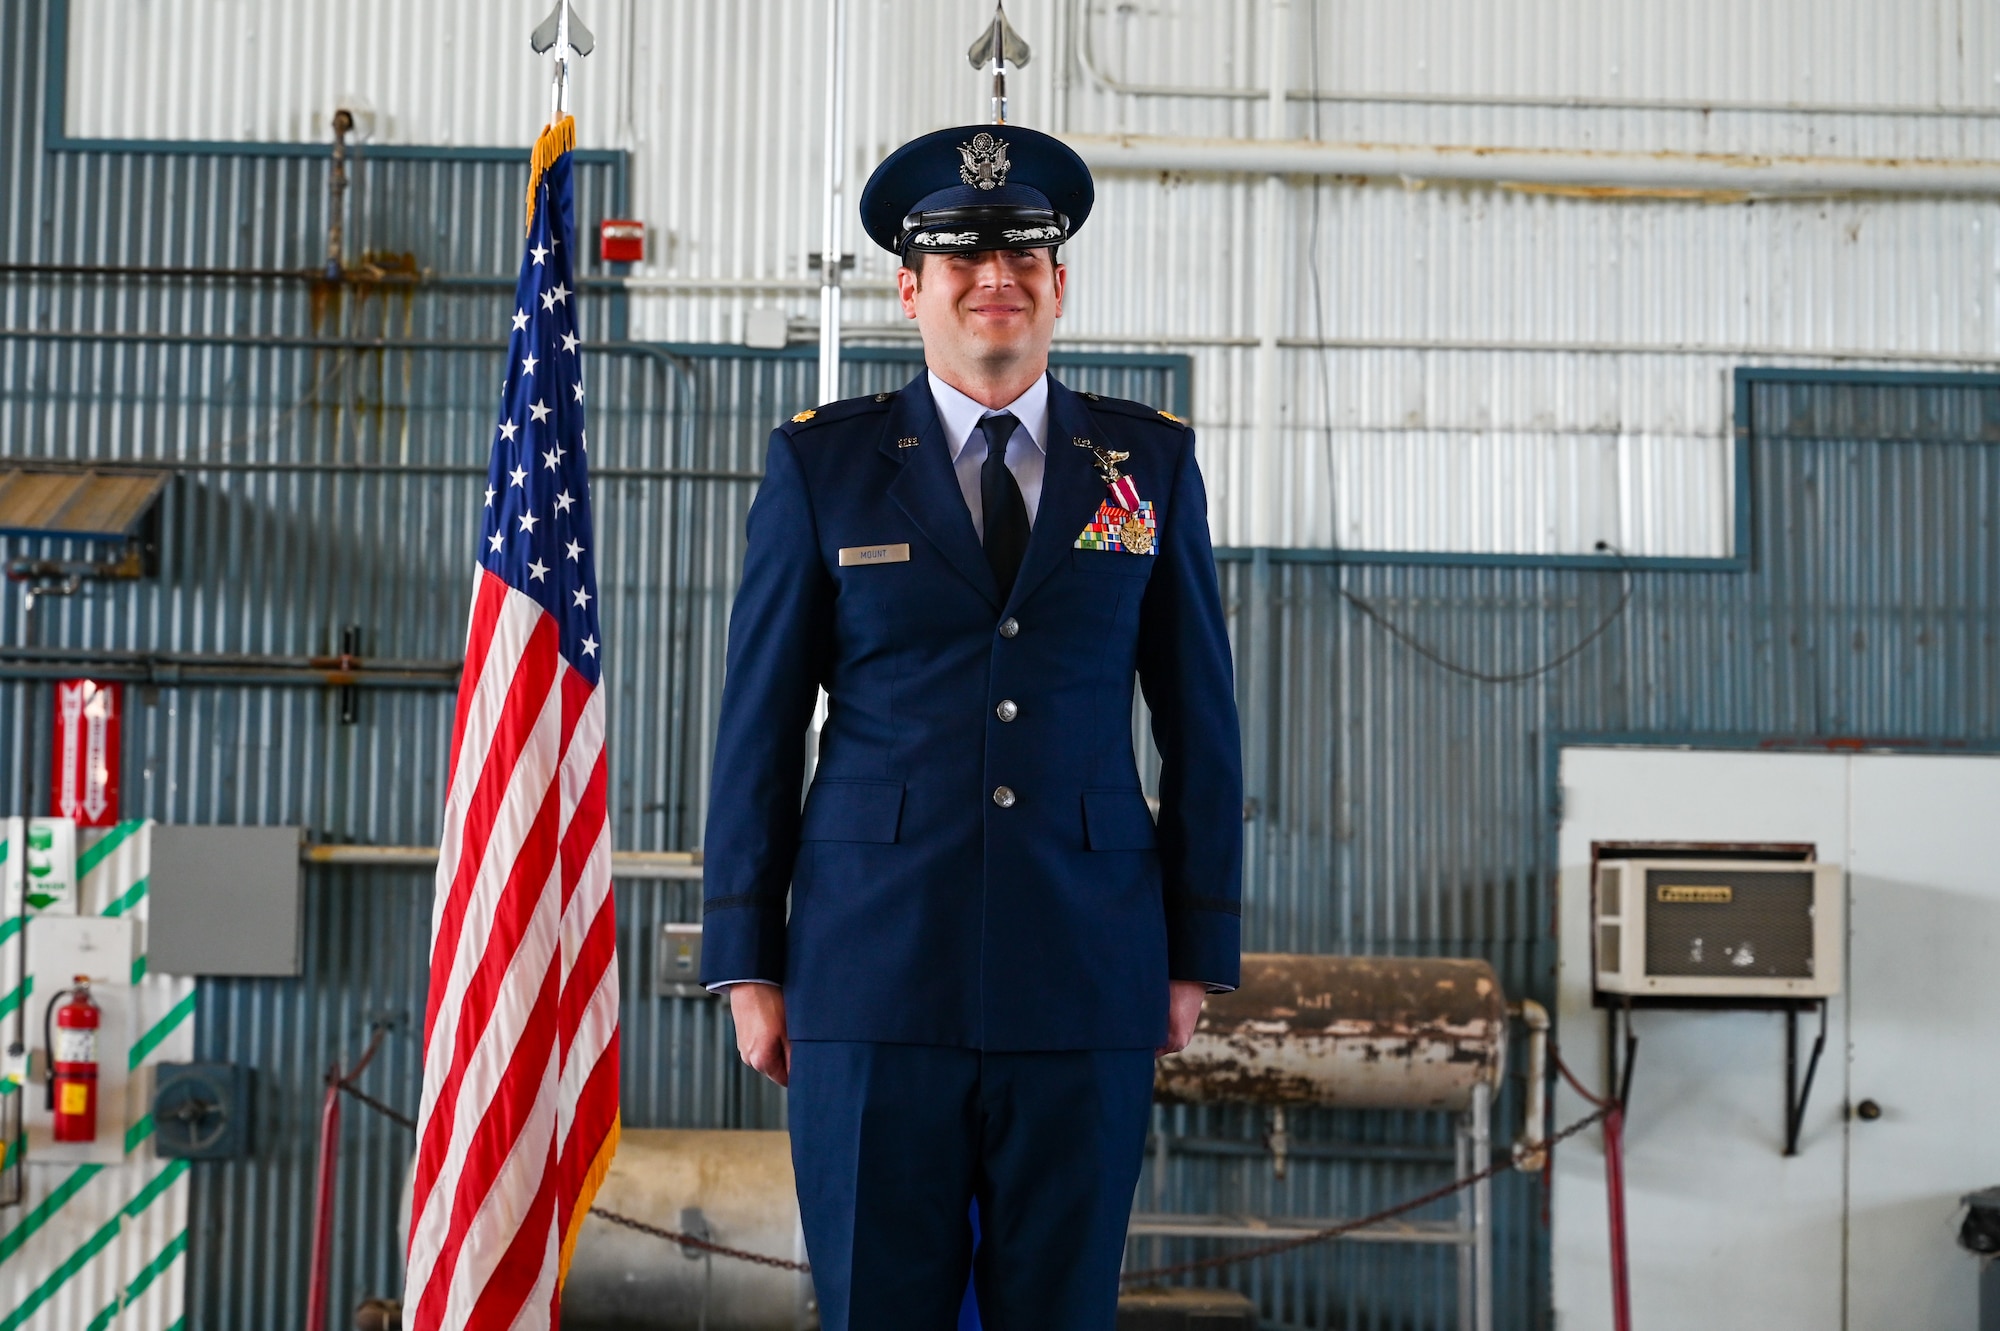 Airman standing in front of flag.